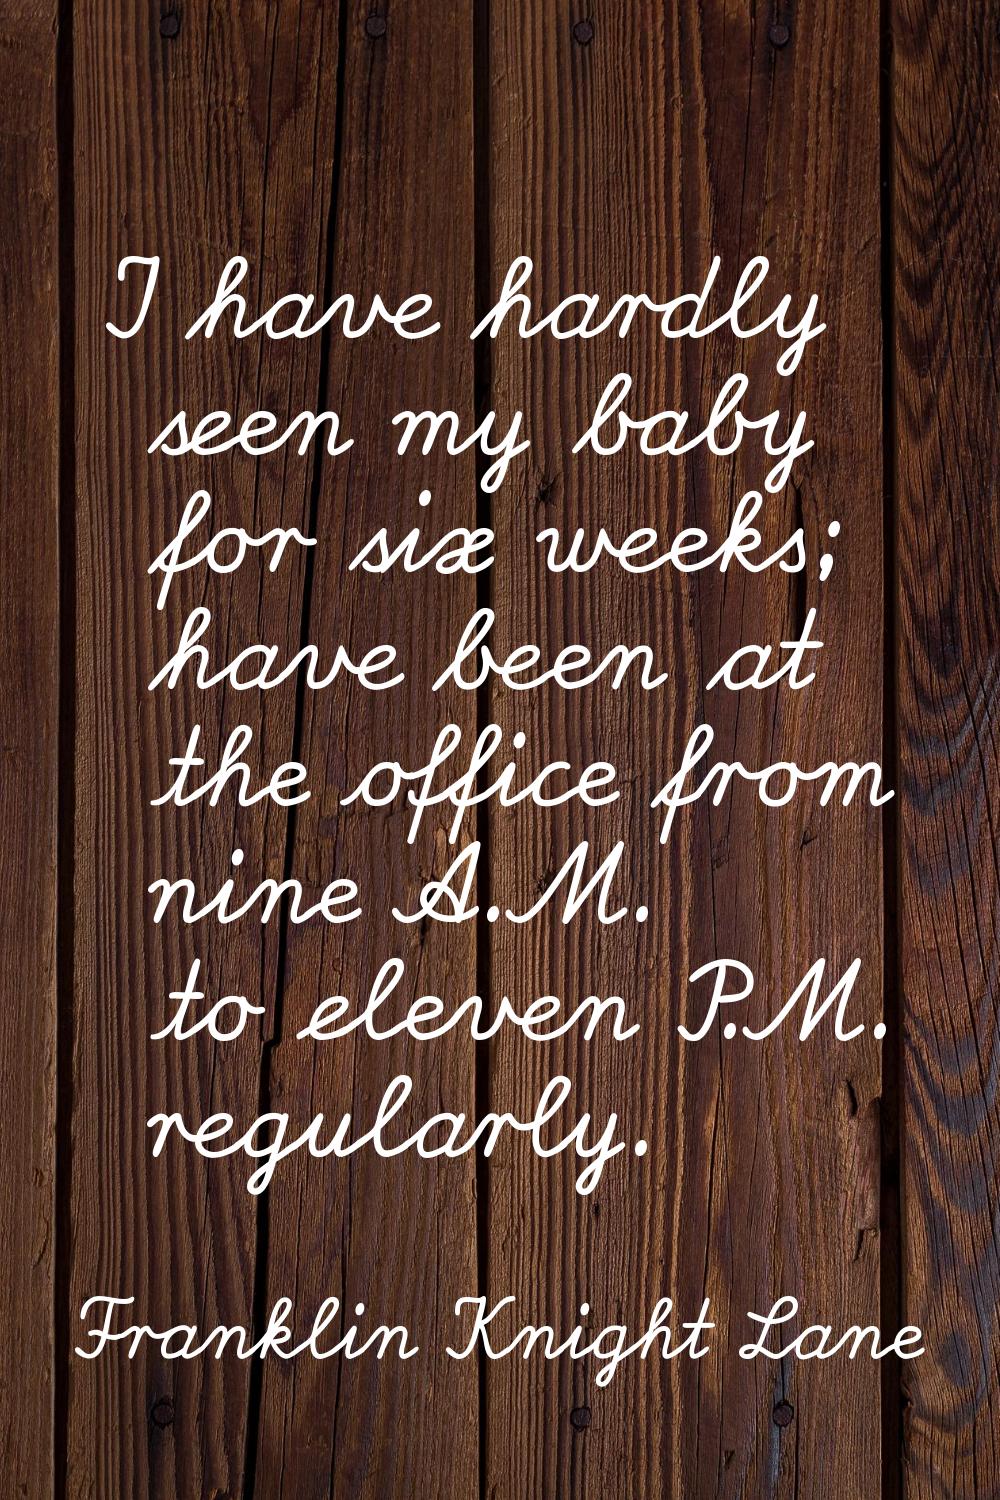 I have hardly seen my baby for six weeks; have been at the office from nine A.M. to eleven P.M. reg